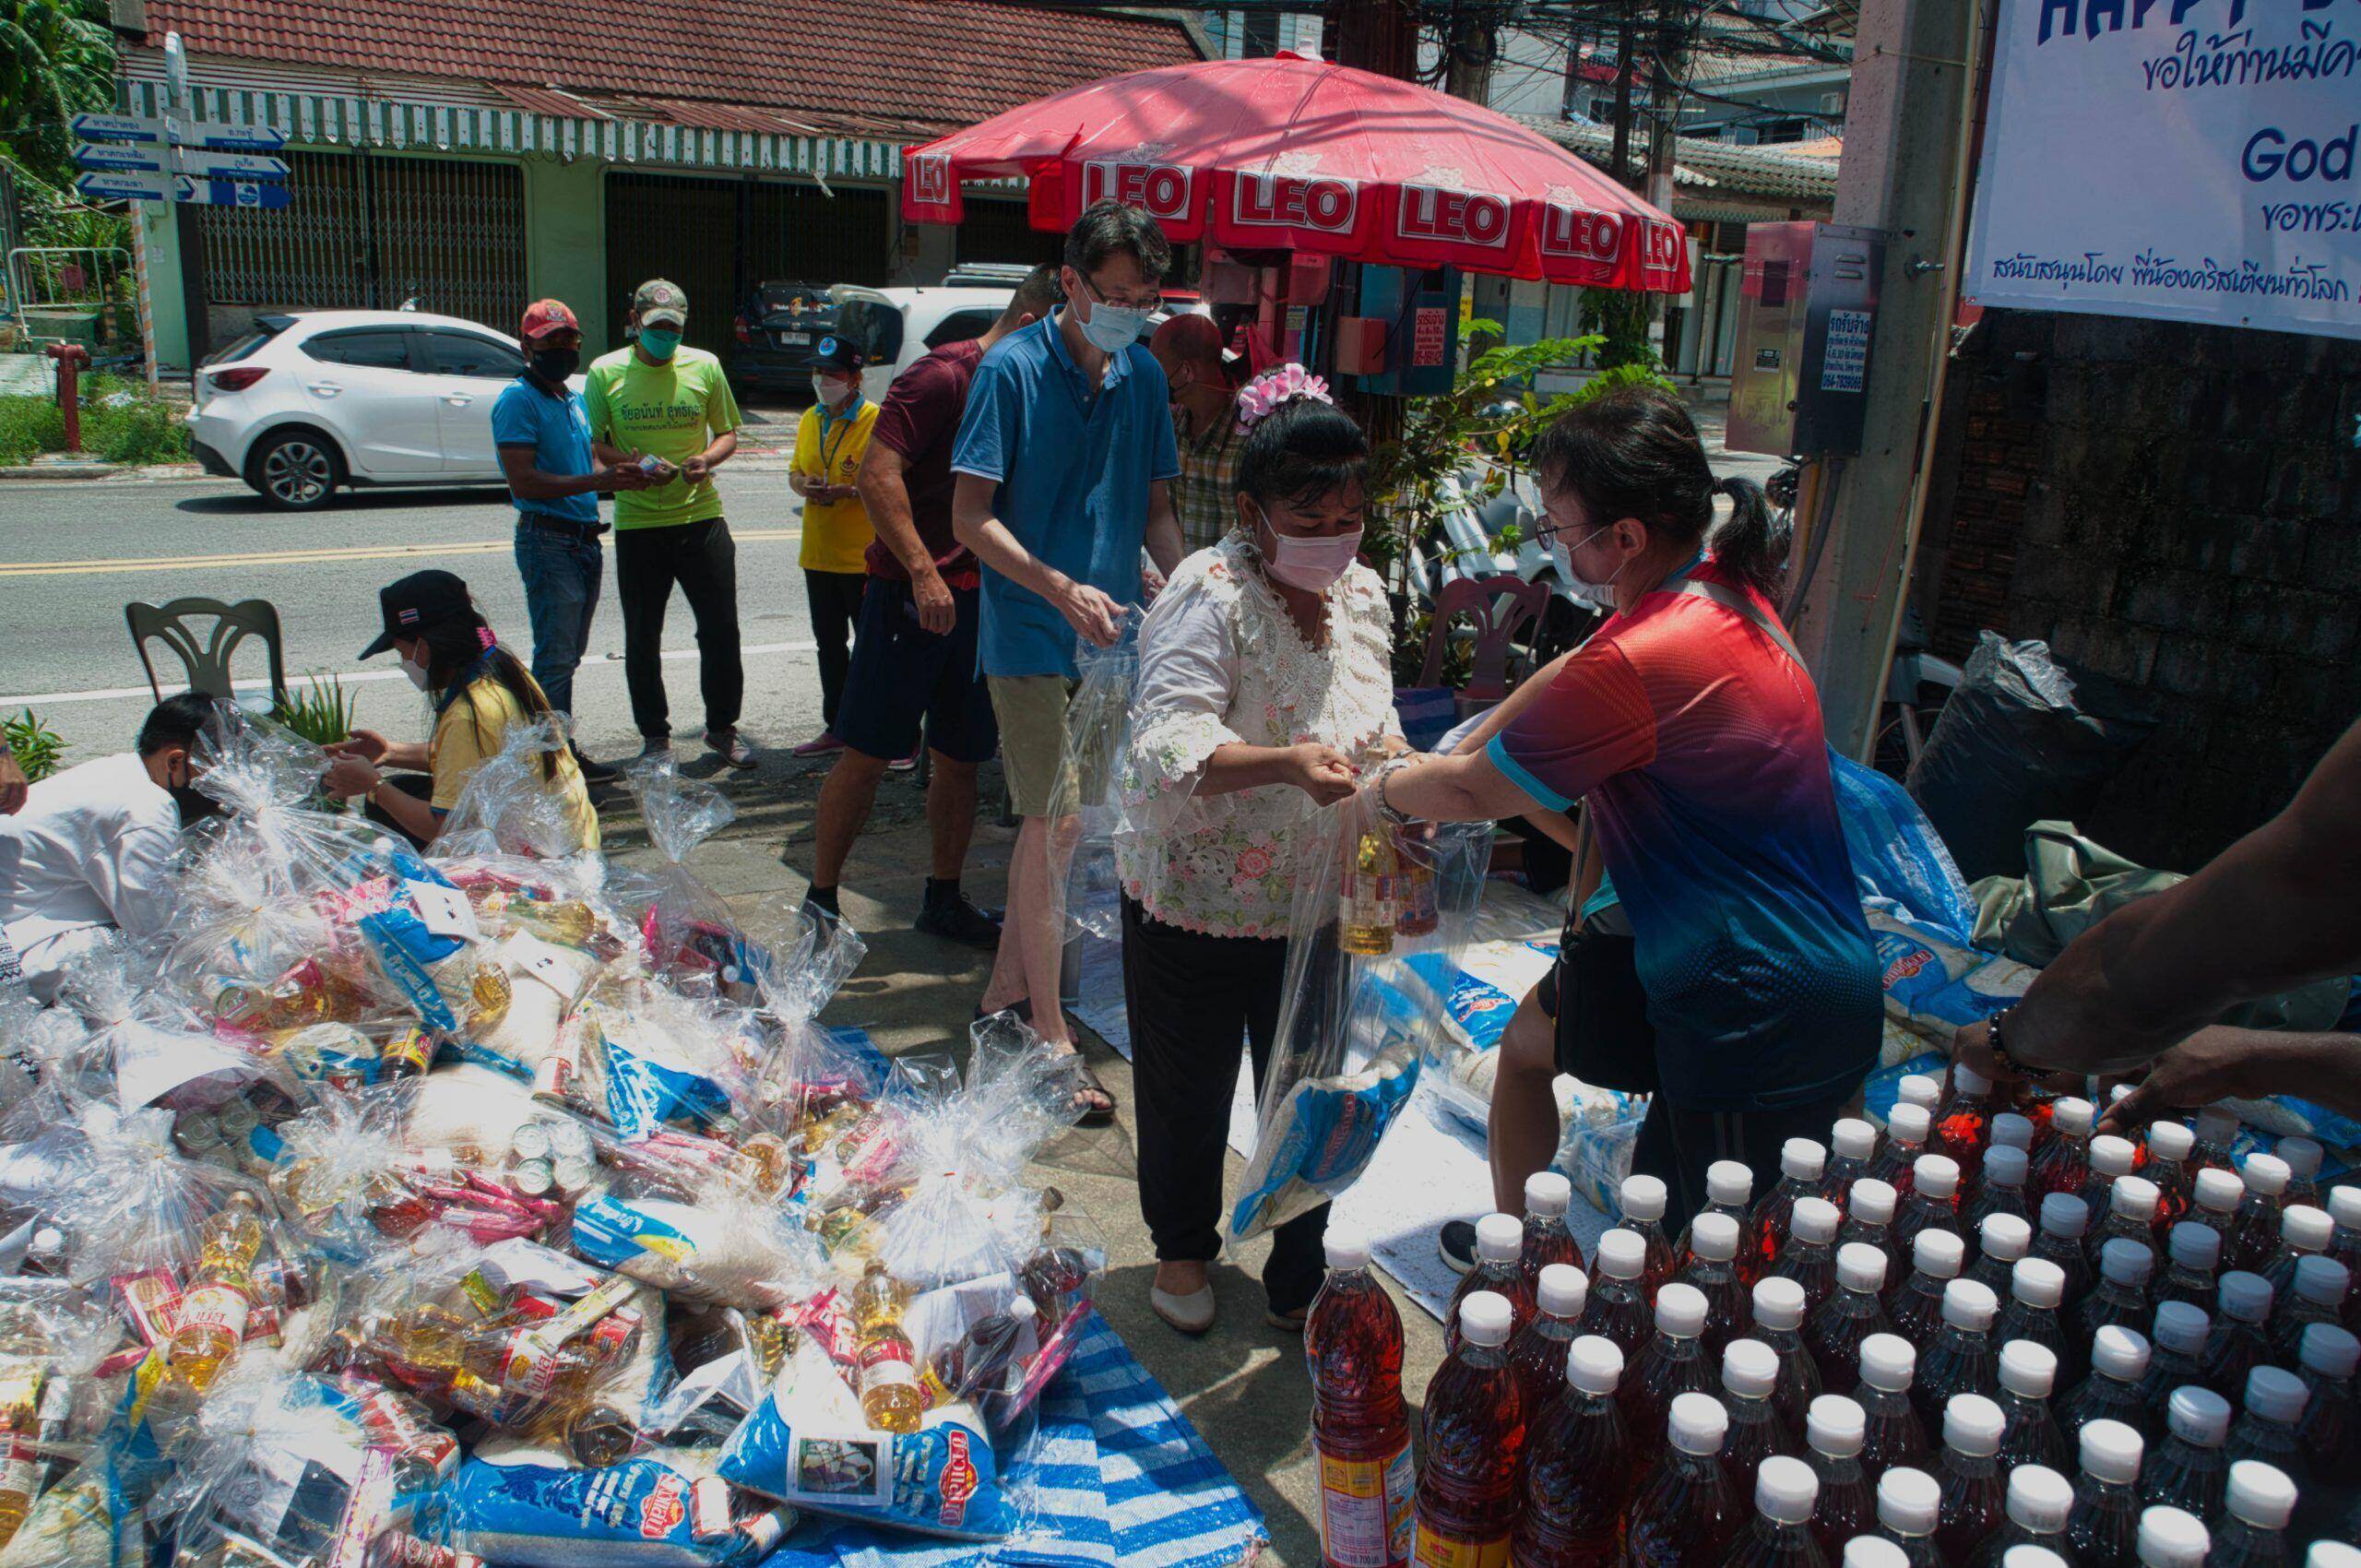 Food donation for the needy in Patong, Phuket